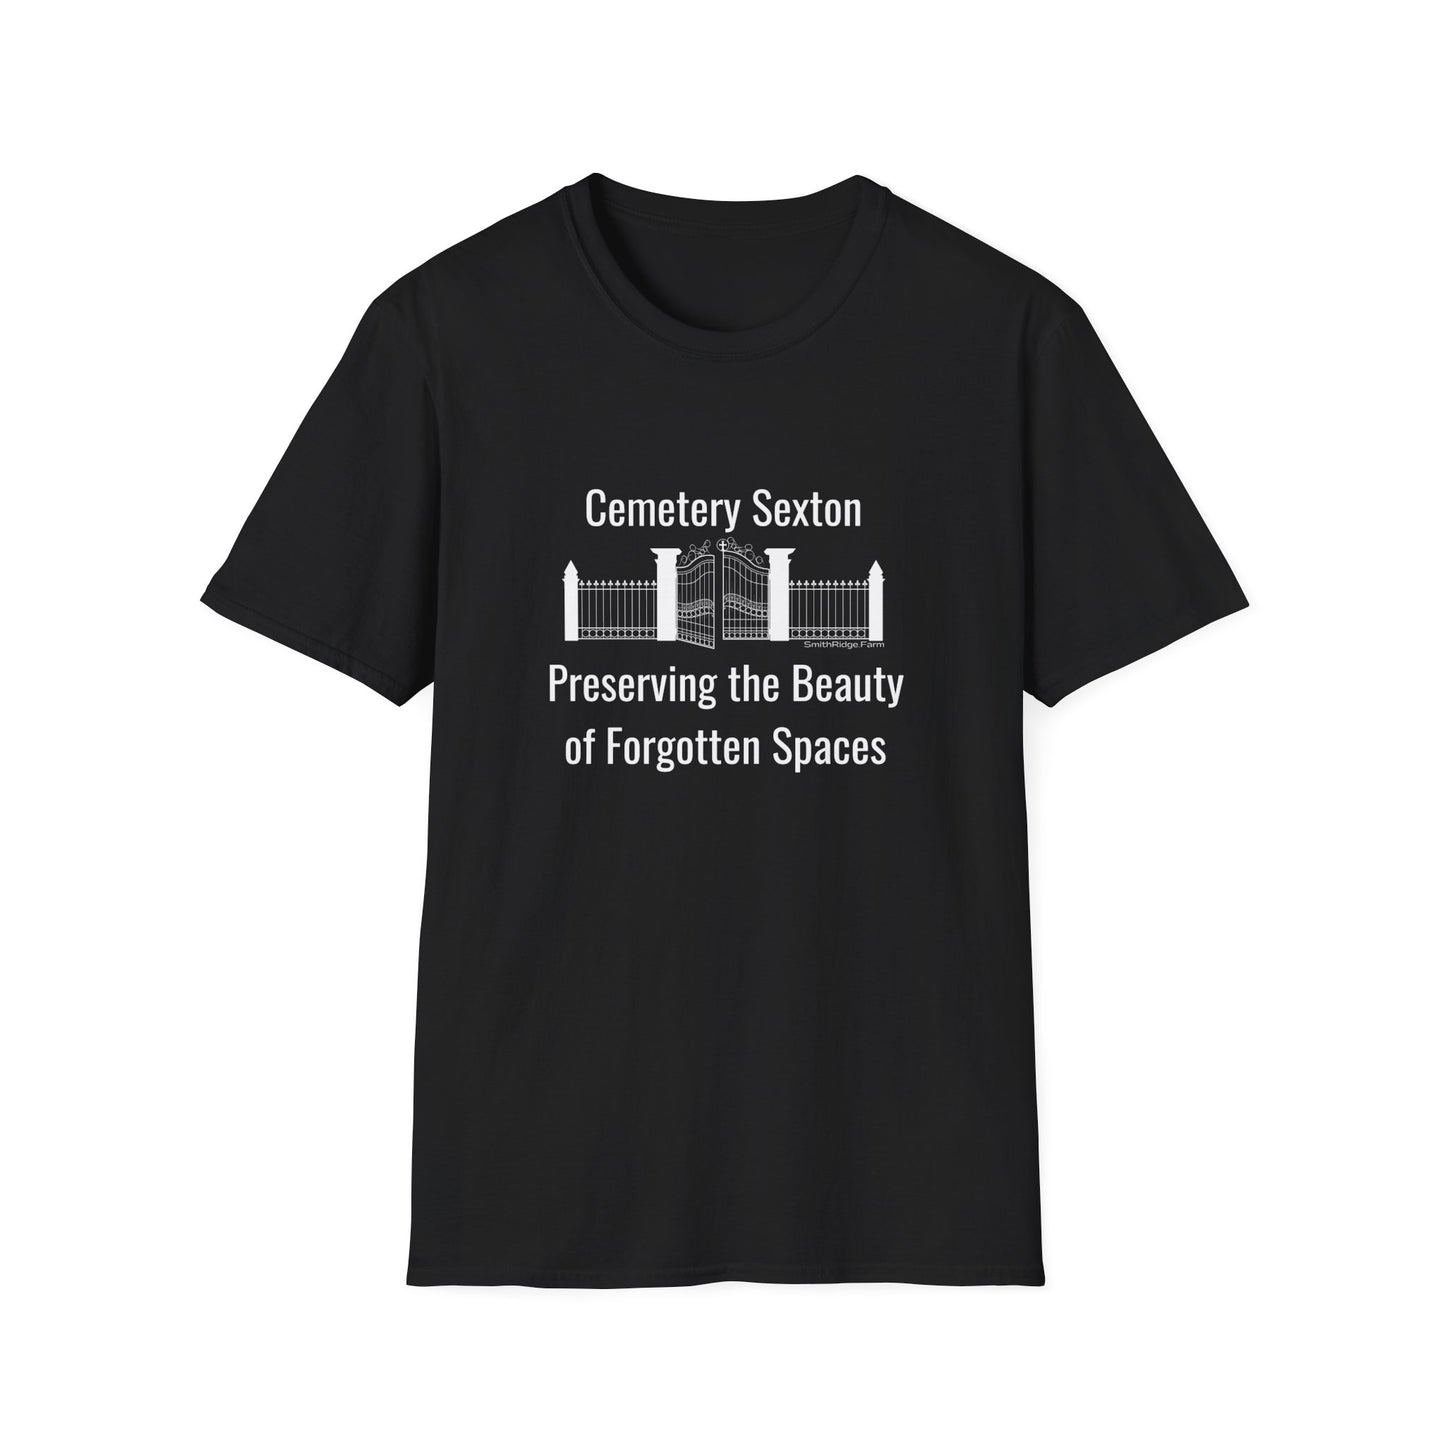 Cemetery Sexton, Preserving the Beauty of Forgotten Spaces T-Shirt